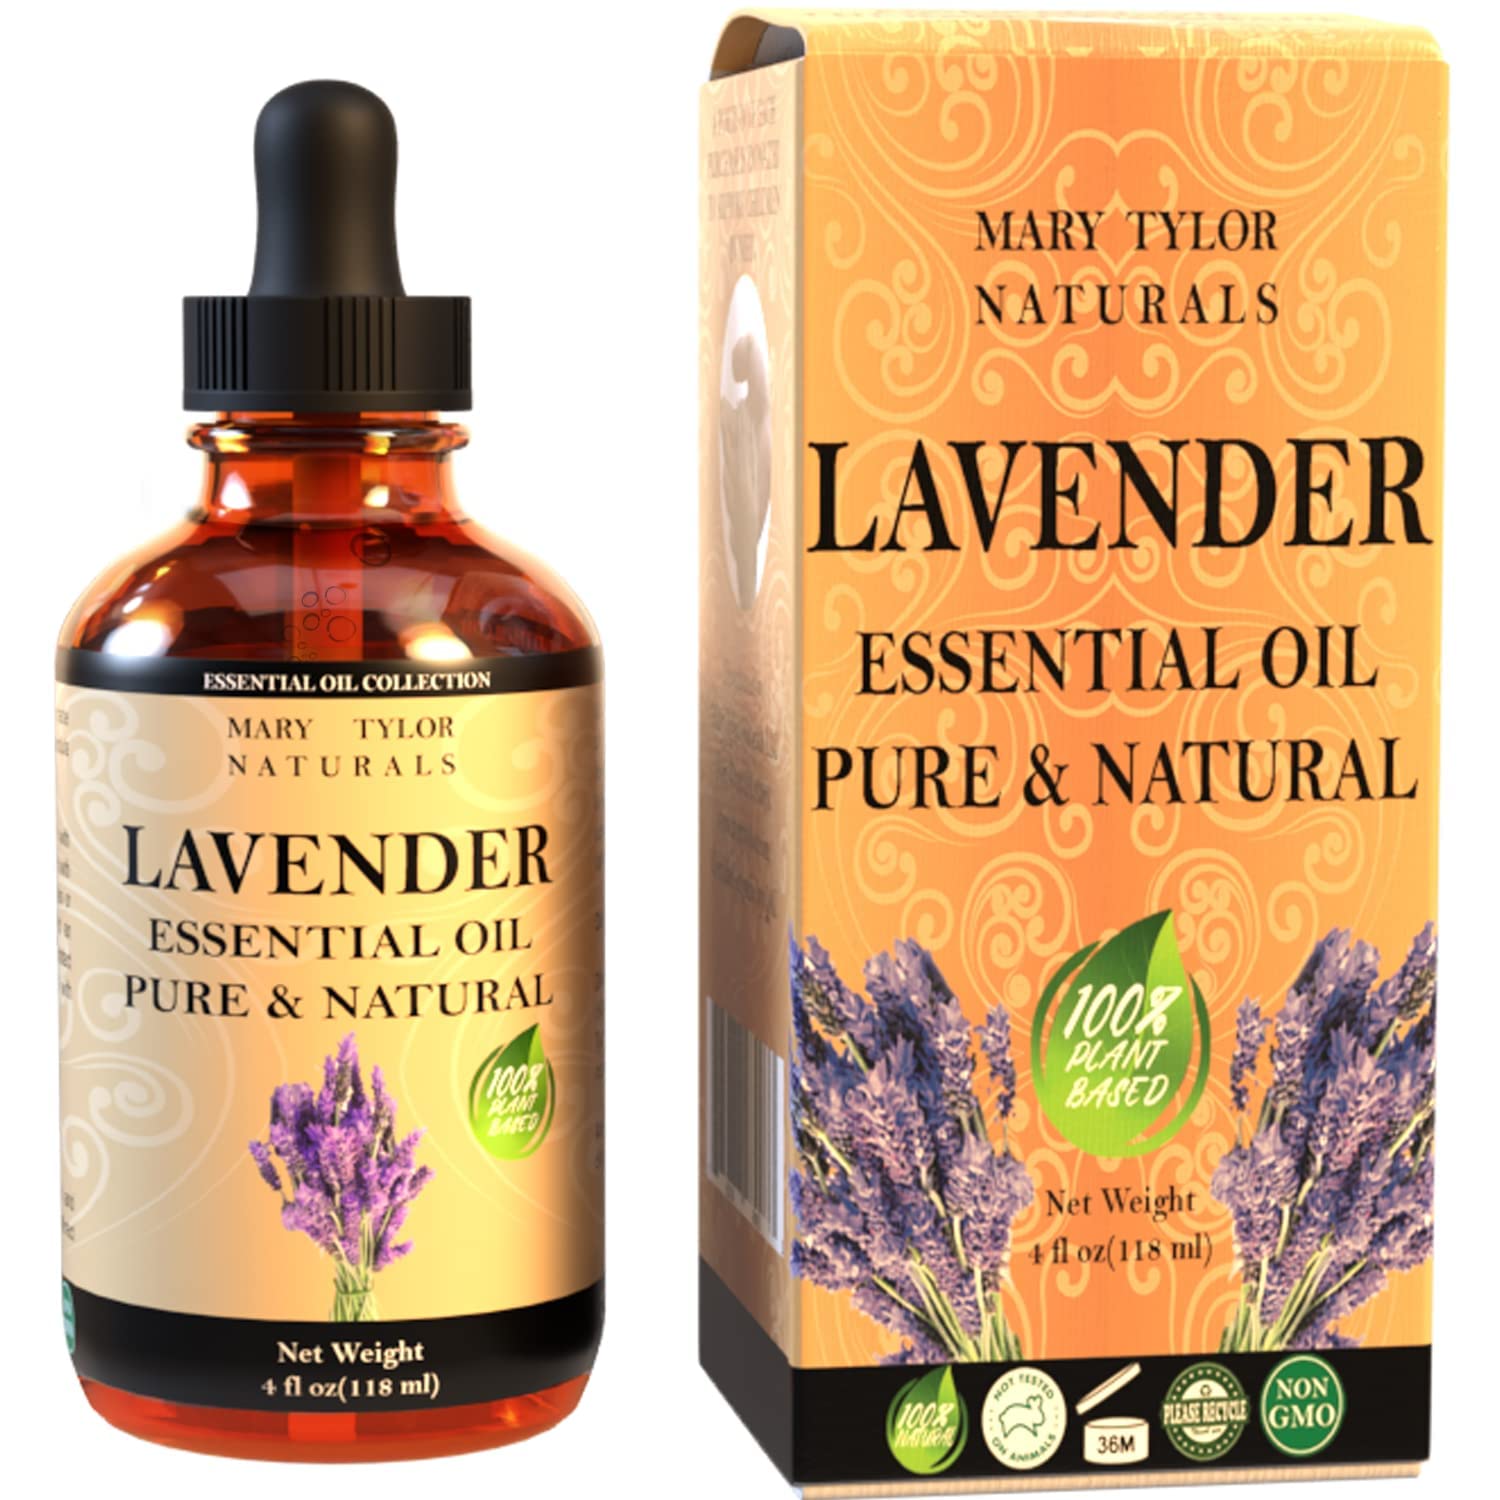 Lavender Essential Oil (4 oz) Premium Therapeutic Grade, 100% Pure and Natural, Perfect for Aromatherapy, Diffuser, DIY by Mary Tylor Naturals